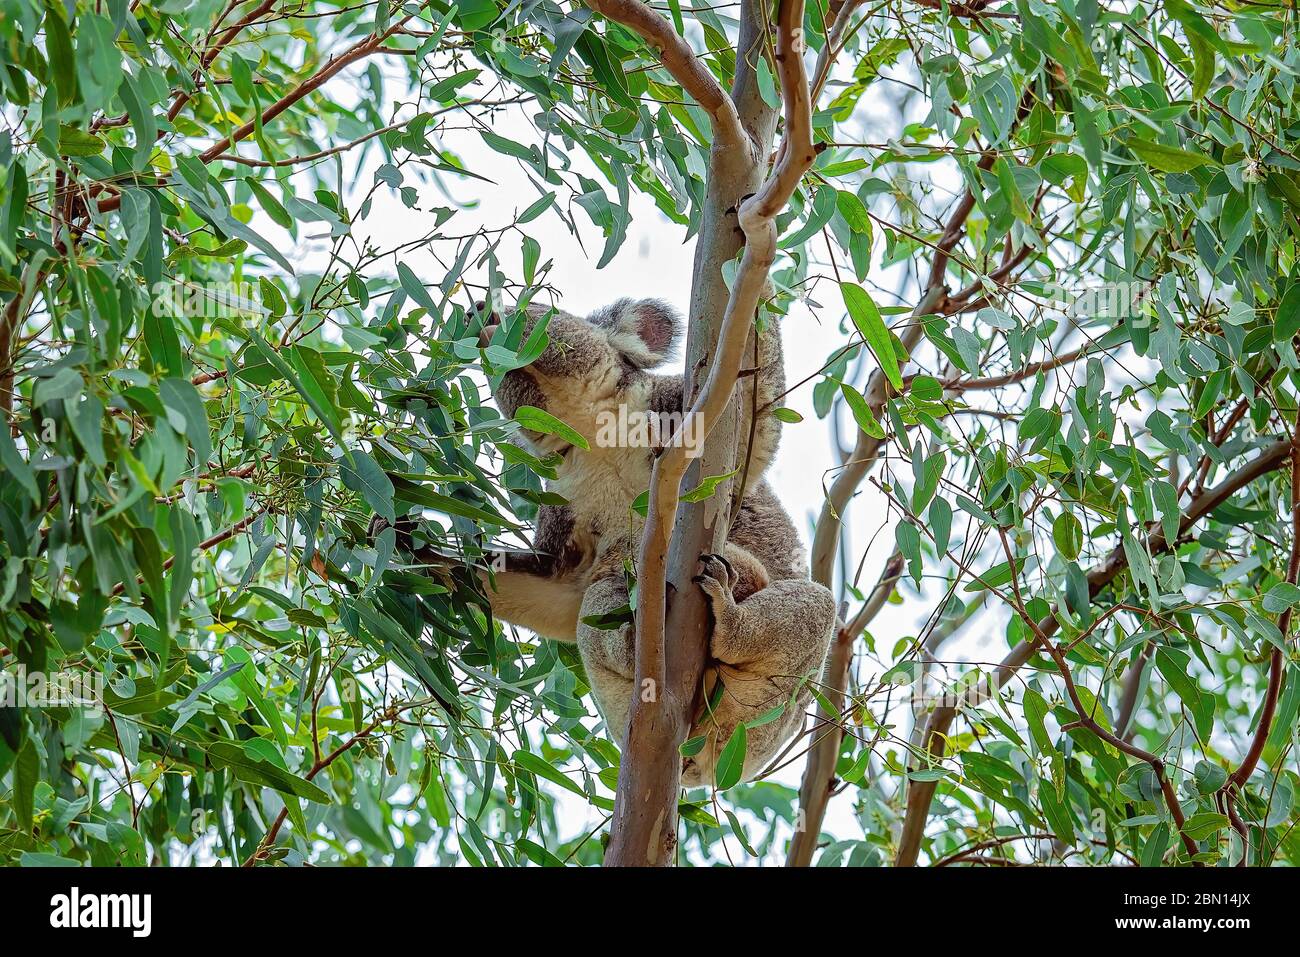 A female Australian koala with a joey in her pouch clinging to a tree branch as she feeds on eucalyptus leaves Stock Photo